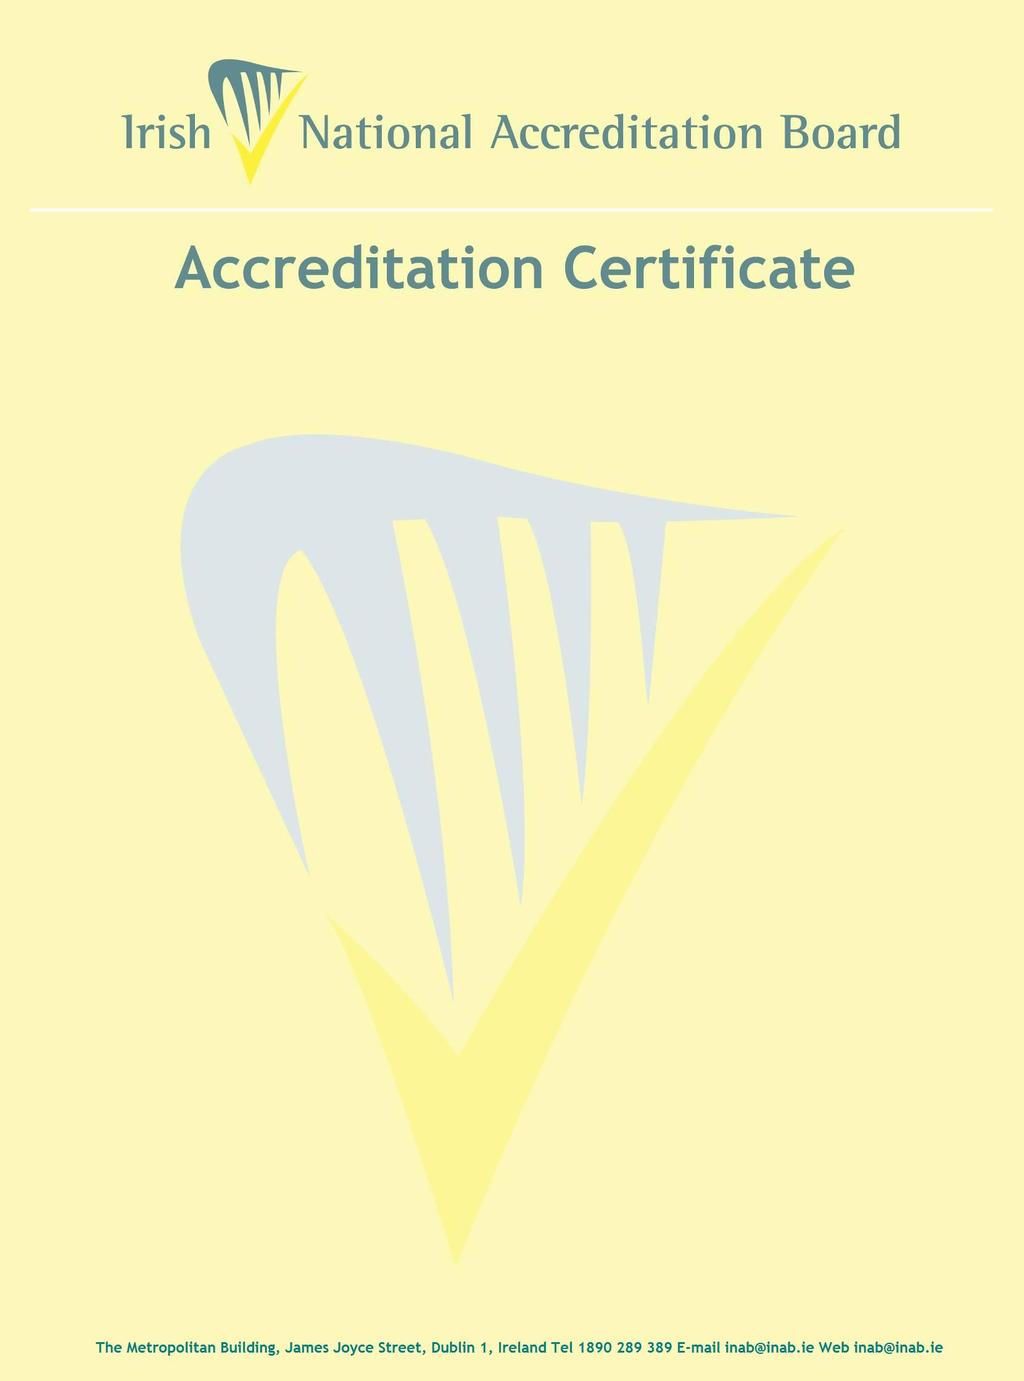 The National Technological Park, Castletroy, Limerick Calibration Laboratory Registration number: 001C is accredited by the Irish National Board (INAB) to undertake calibration as detailed in the